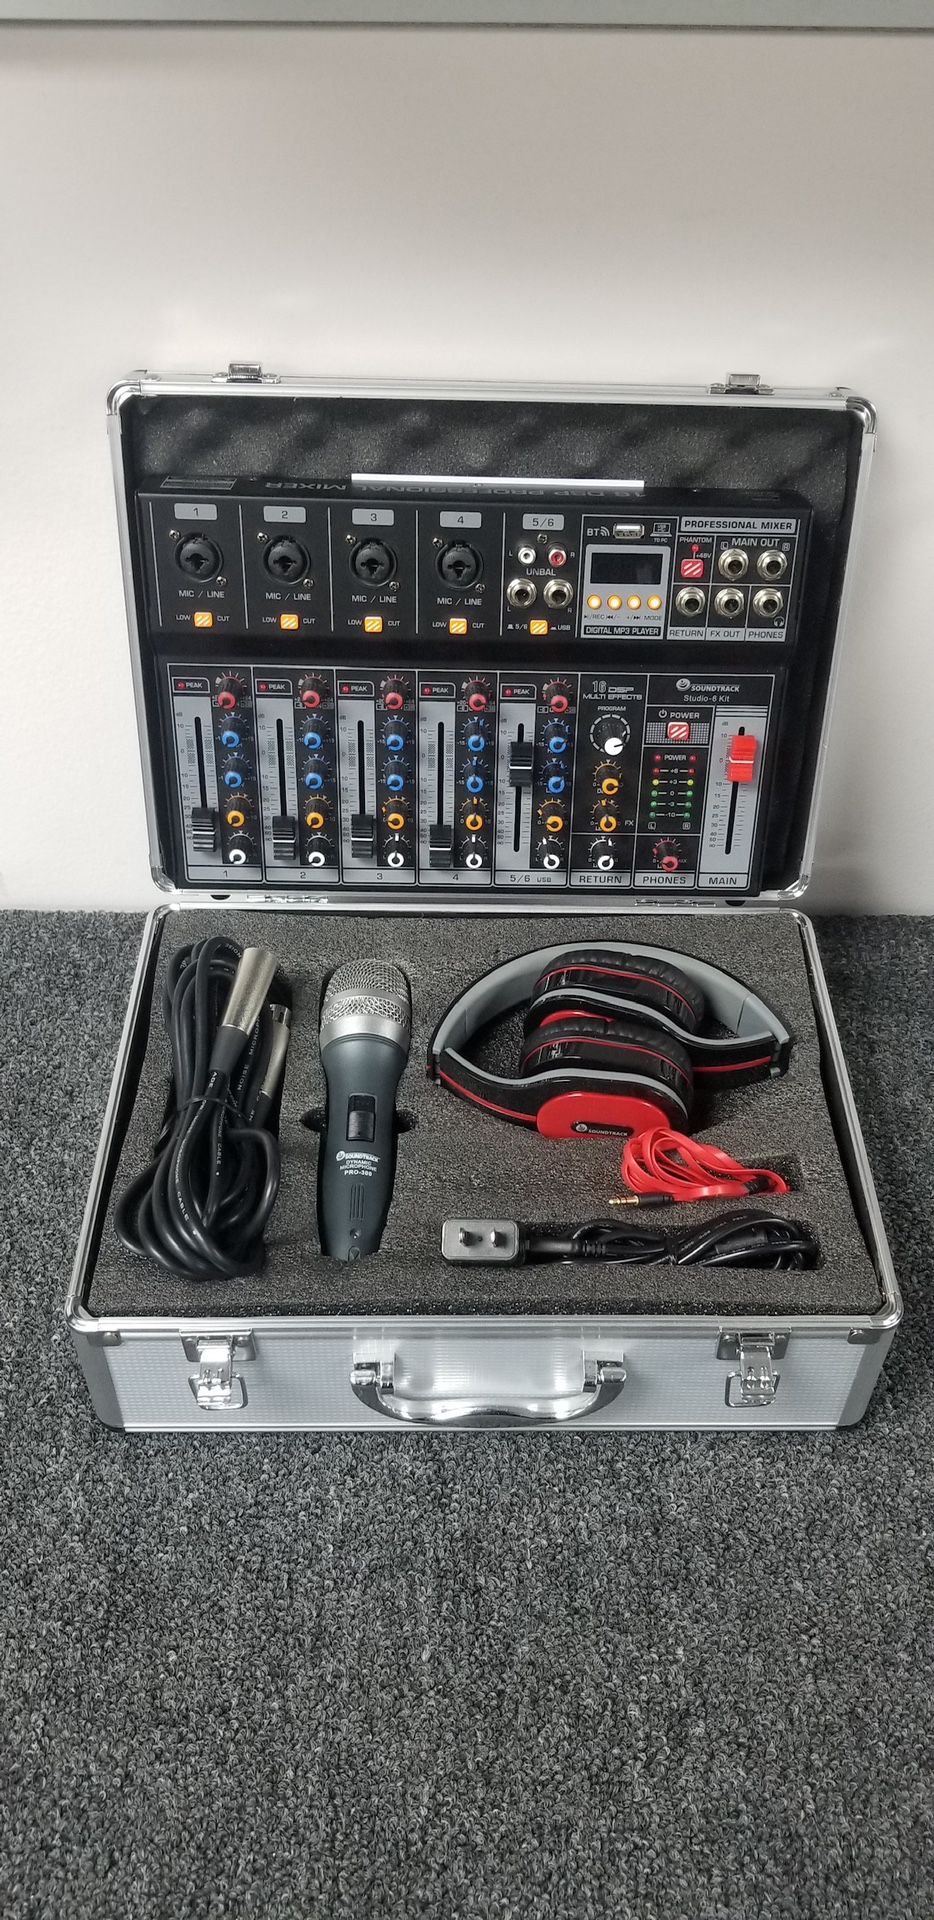 Brand New six channel mixer with bluetooth and sound effects. One Microphone, headphones, and case included. NUEVO. 